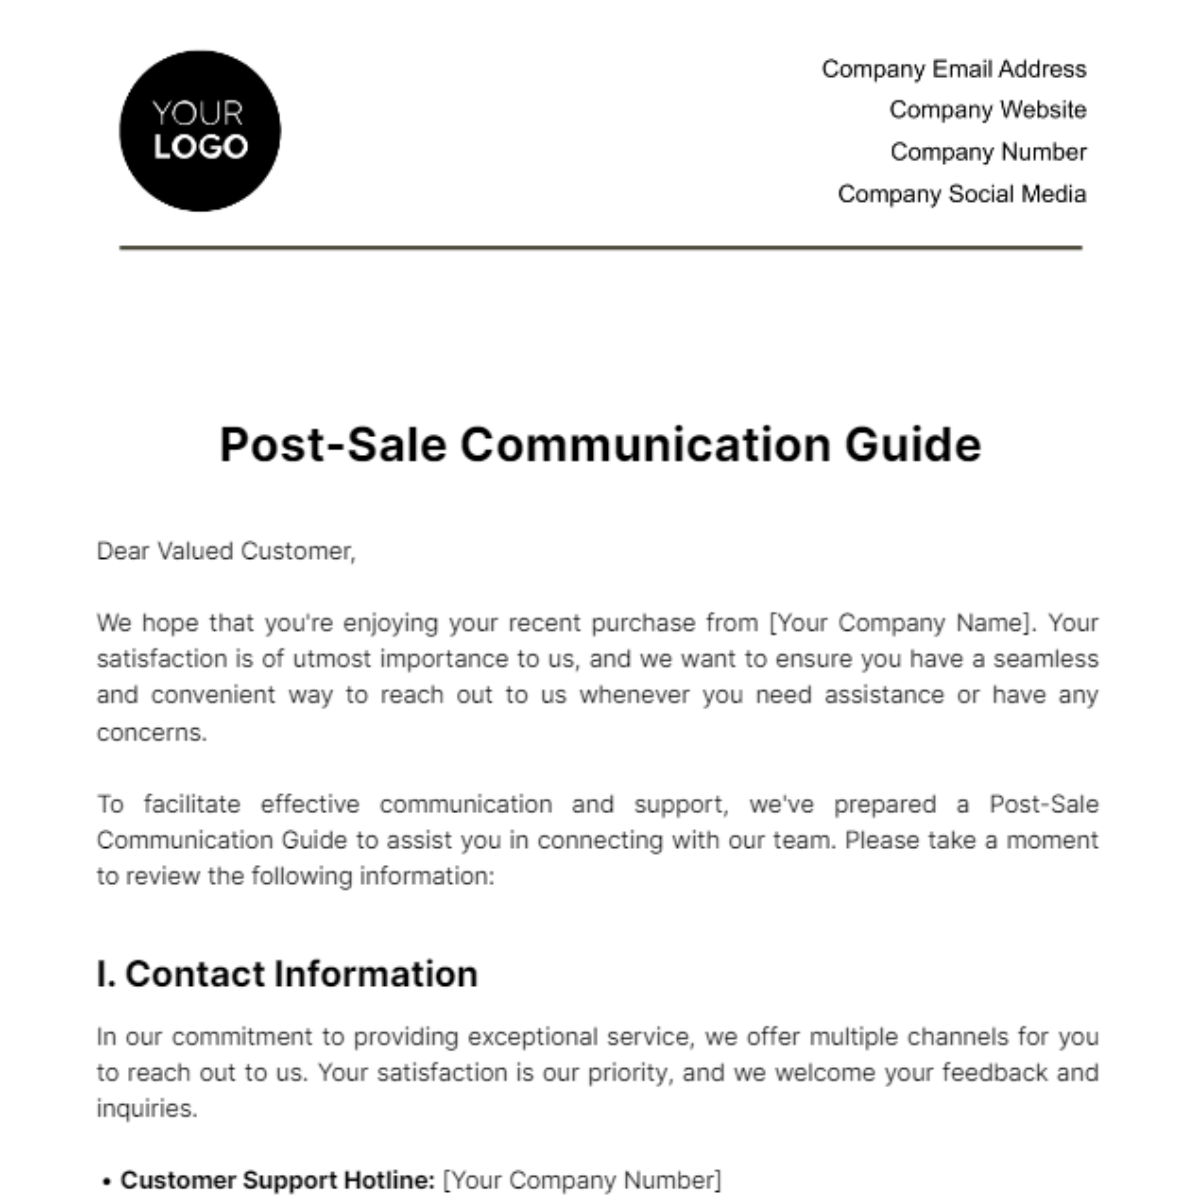 Free Post-Sale Communication Guide Template